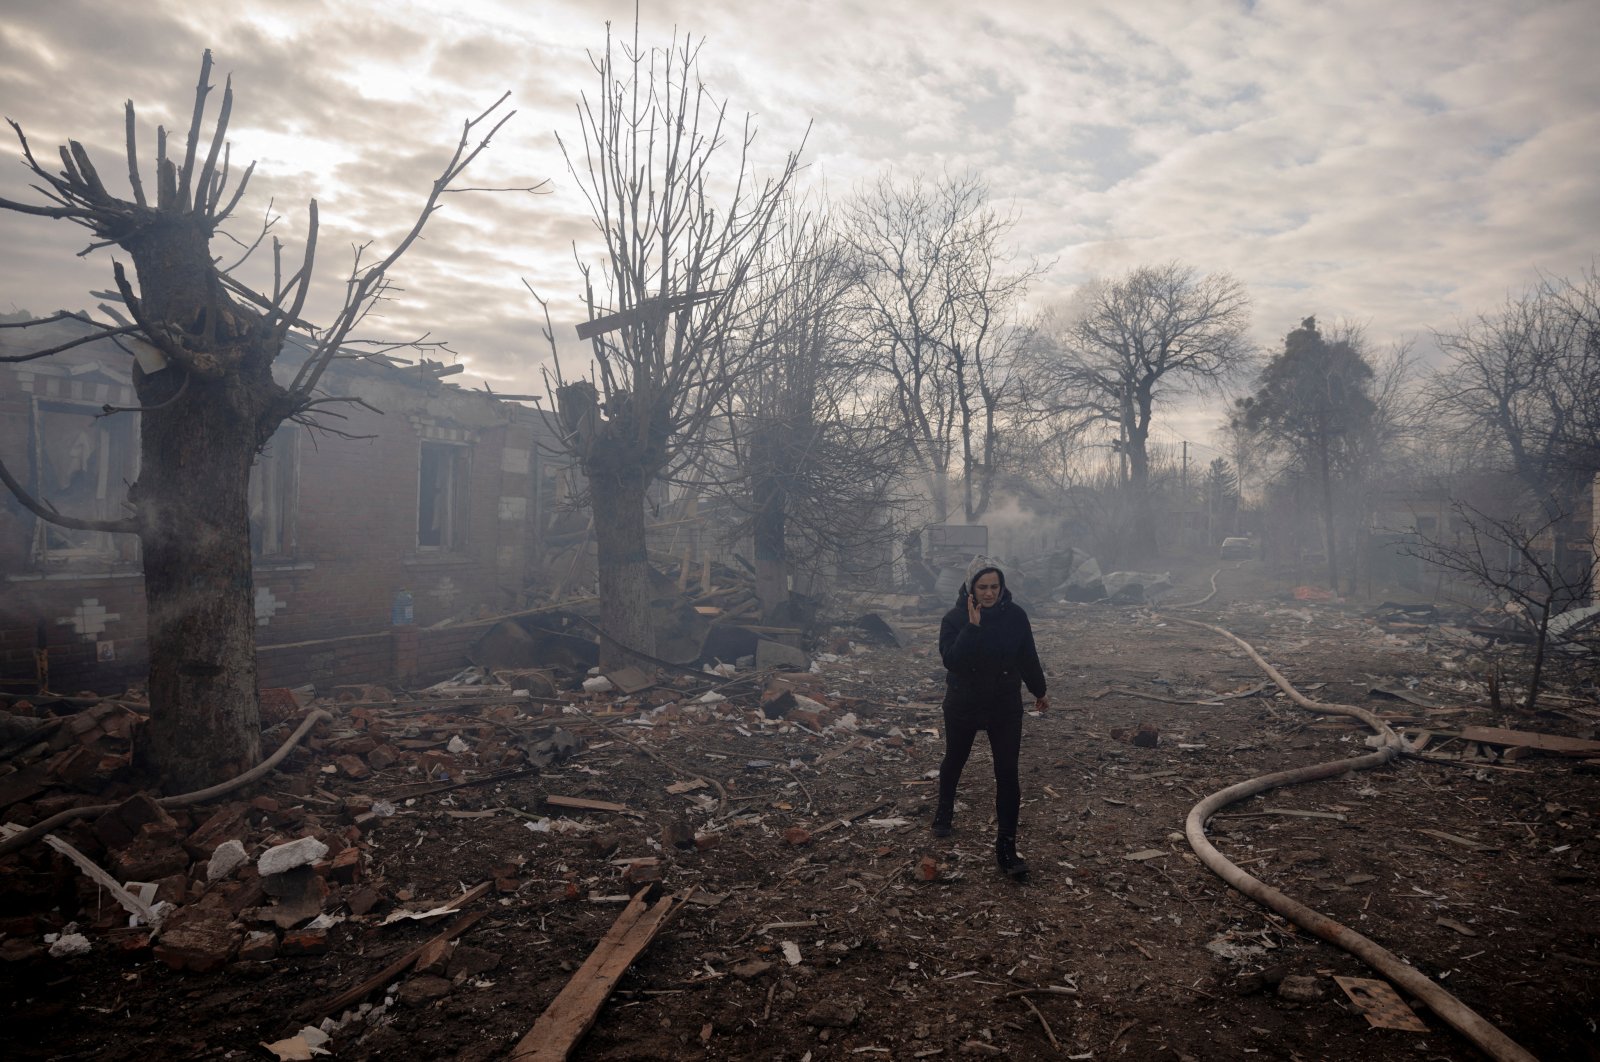 A woman walks between residential houses destroyed by Russian shelling in a settlement outside Kharkiv, Ukraine, March 28, 2022. (Reuters Photo)